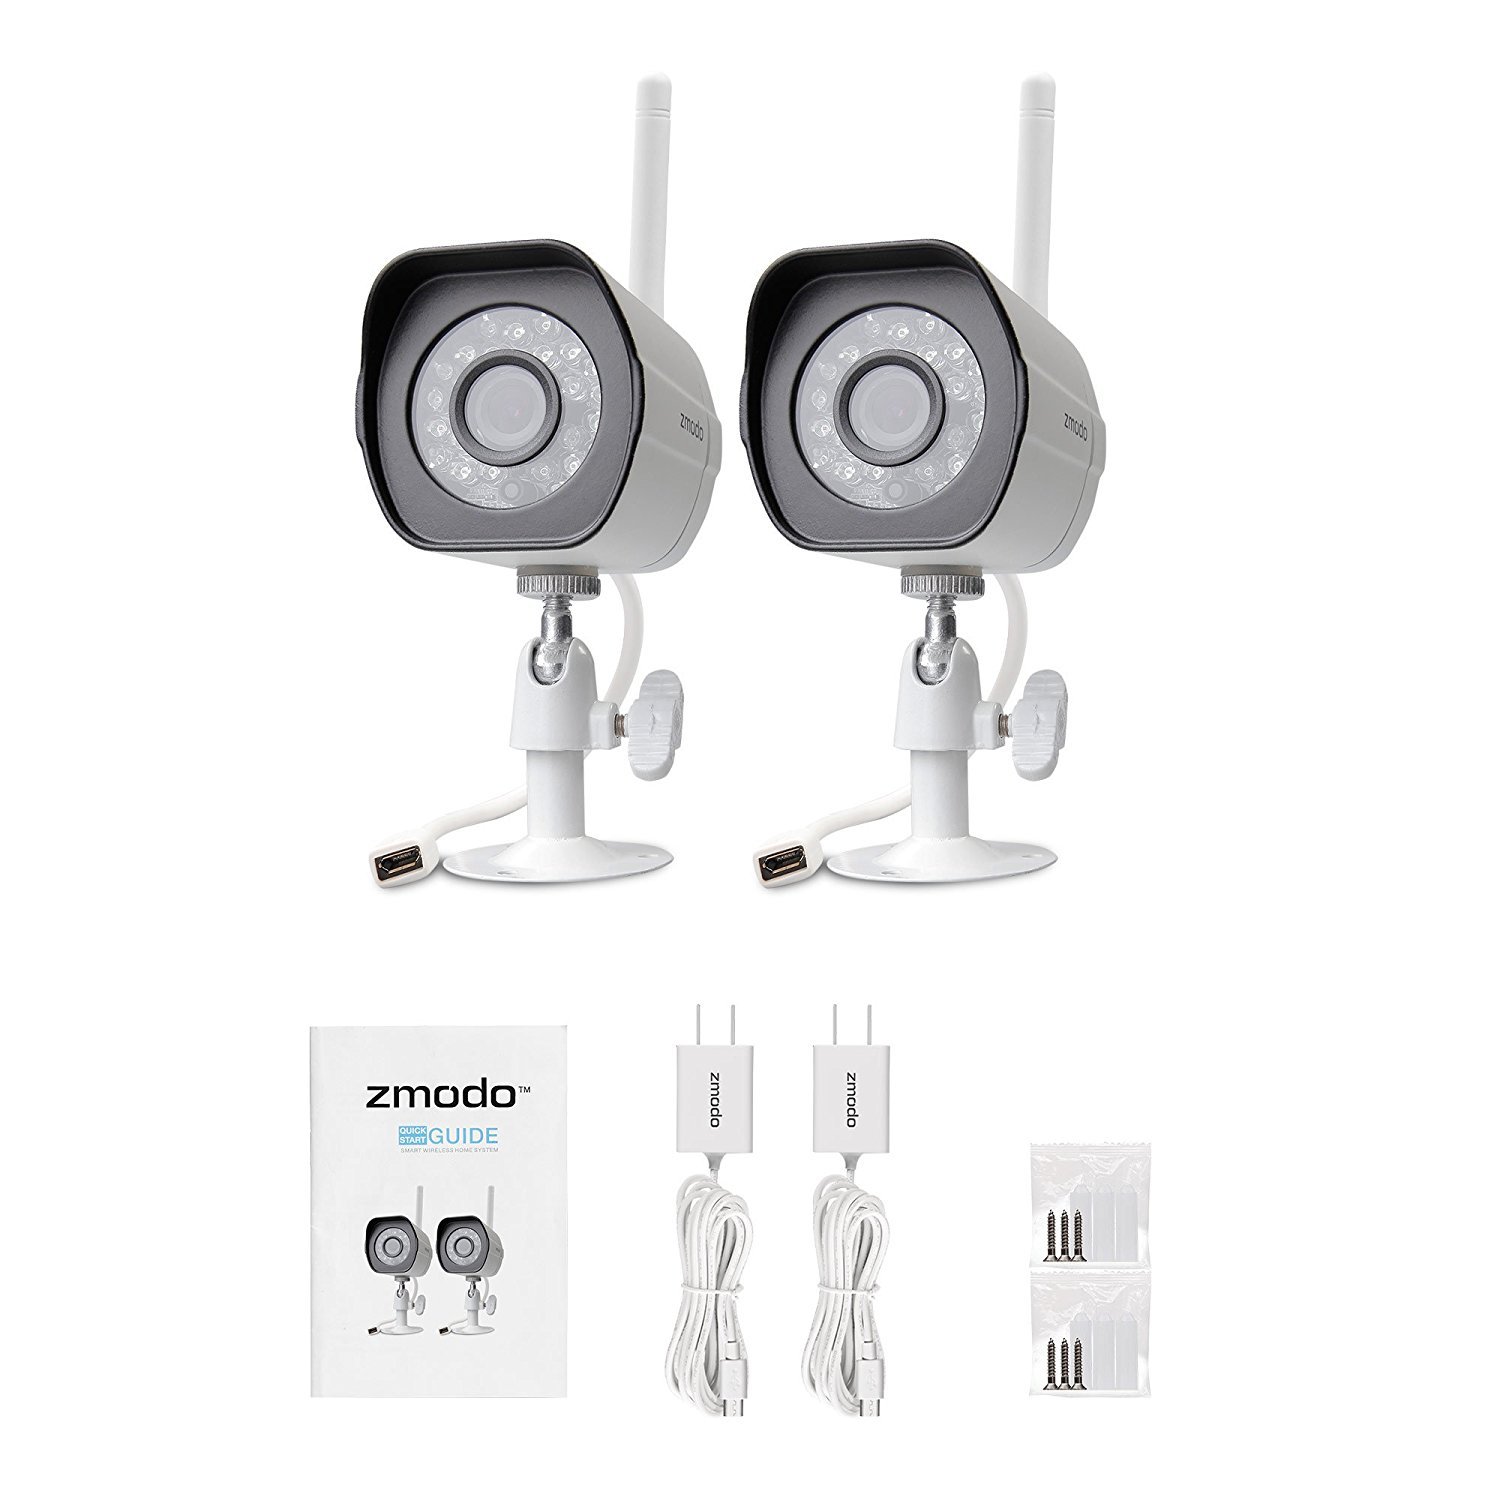 Zmodo Wireless Security Camera System (2 Pack) Smart HD Outdoor WiFi IP Cameras with Night Vision – Works with Alexa